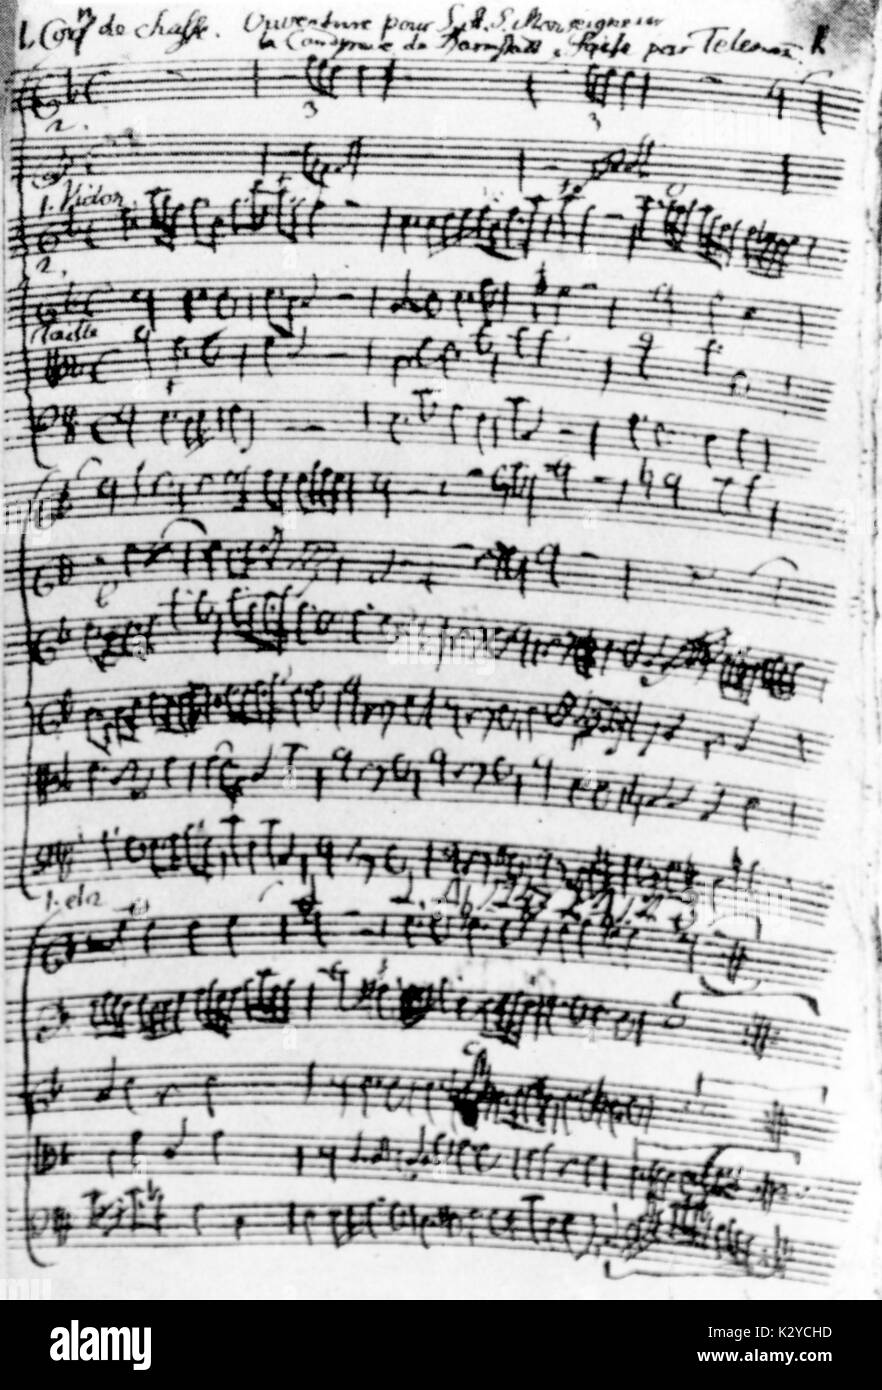 TELEMANN, Georg Philip  - Composition Page 1 of instrumental compositions (overtures, sinfonias, divertimenti etc) composed by Telemann 1691-1767 when he was 86, for Ludwig VIII of Hesse-Darmstadt. German composer (1681-1767). Stock Photo